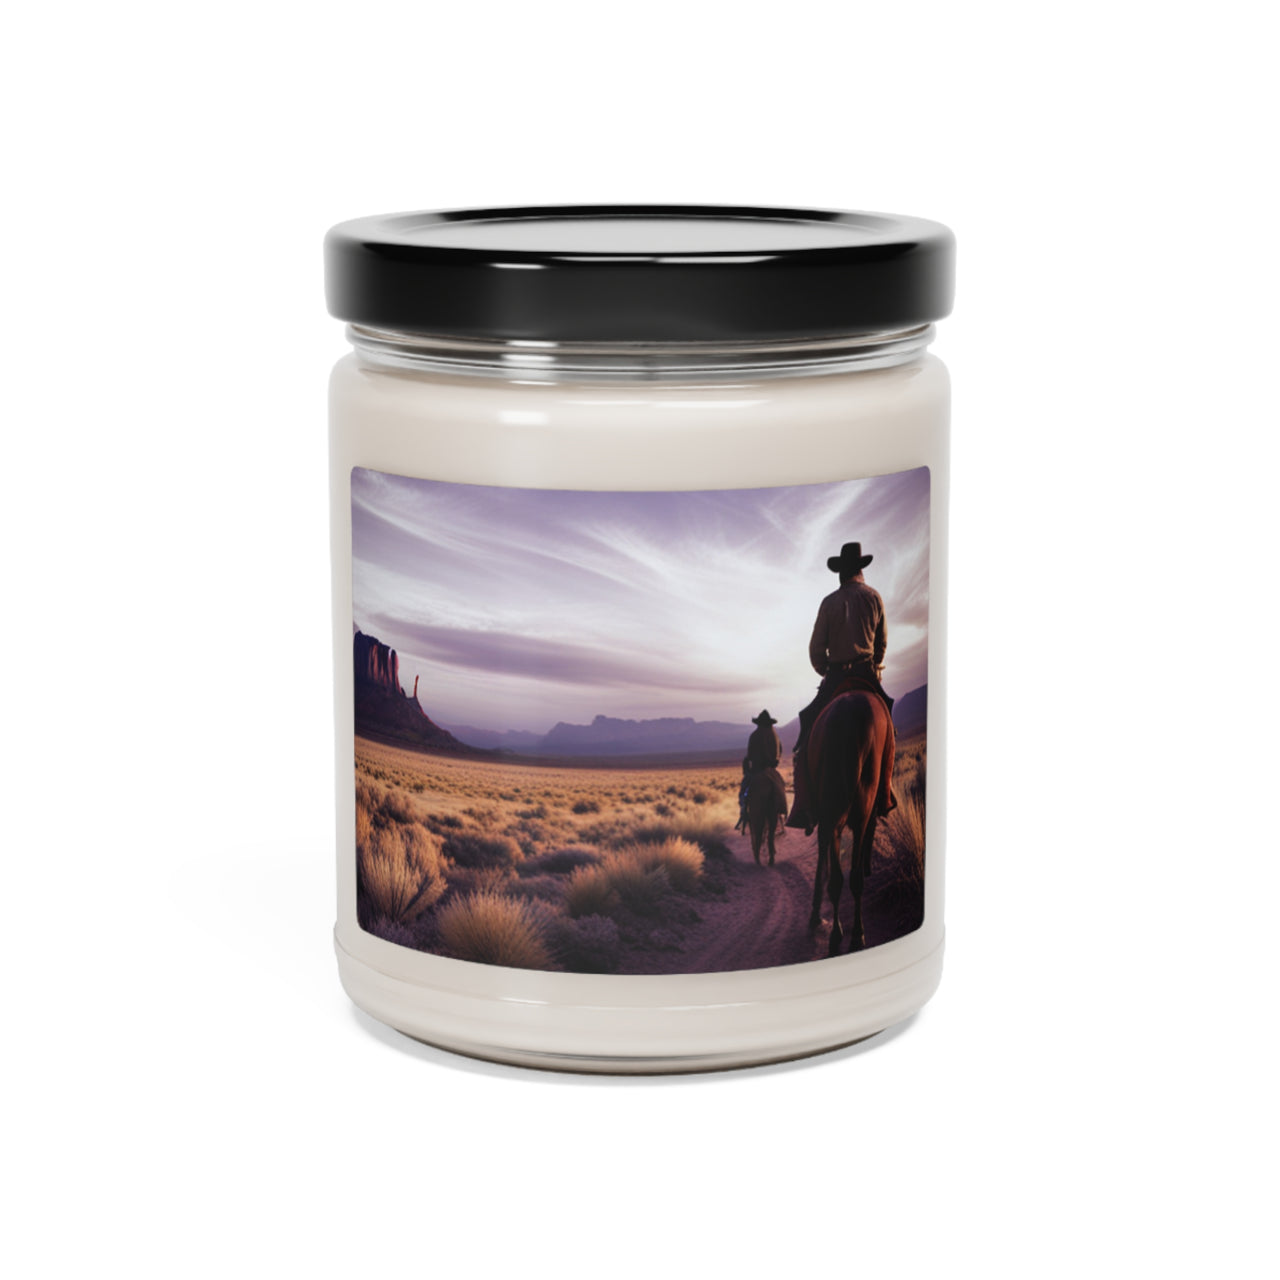 Riding Into the Sunset Soy Candle